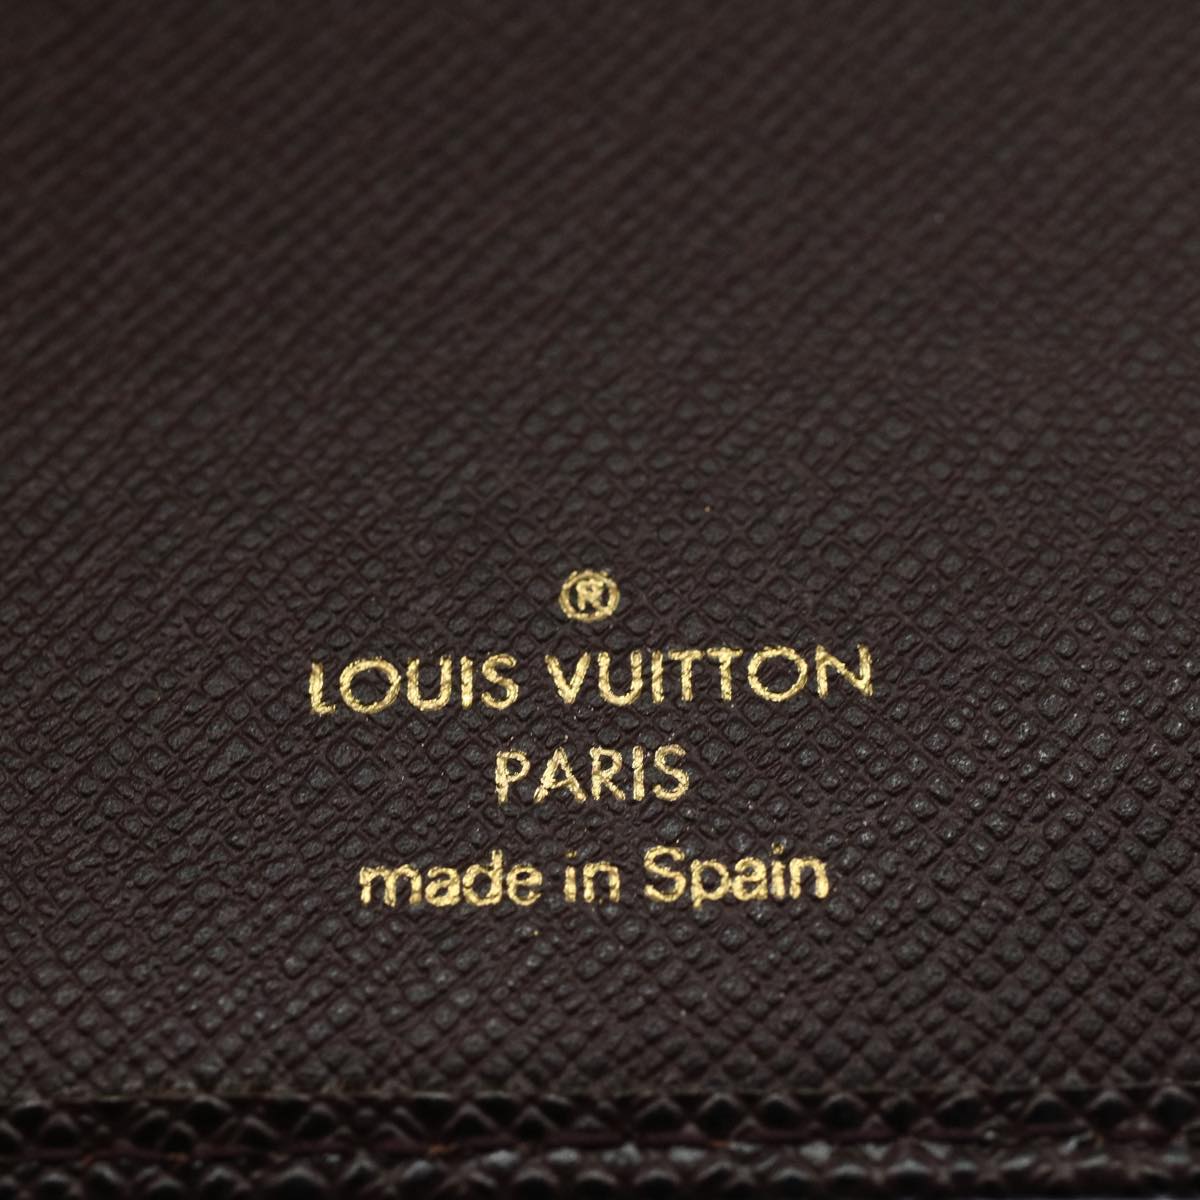 LOUIS VUITTON Taiga Leather Agenda Poche Note Cover Grizzly R20430 Auth bs9455